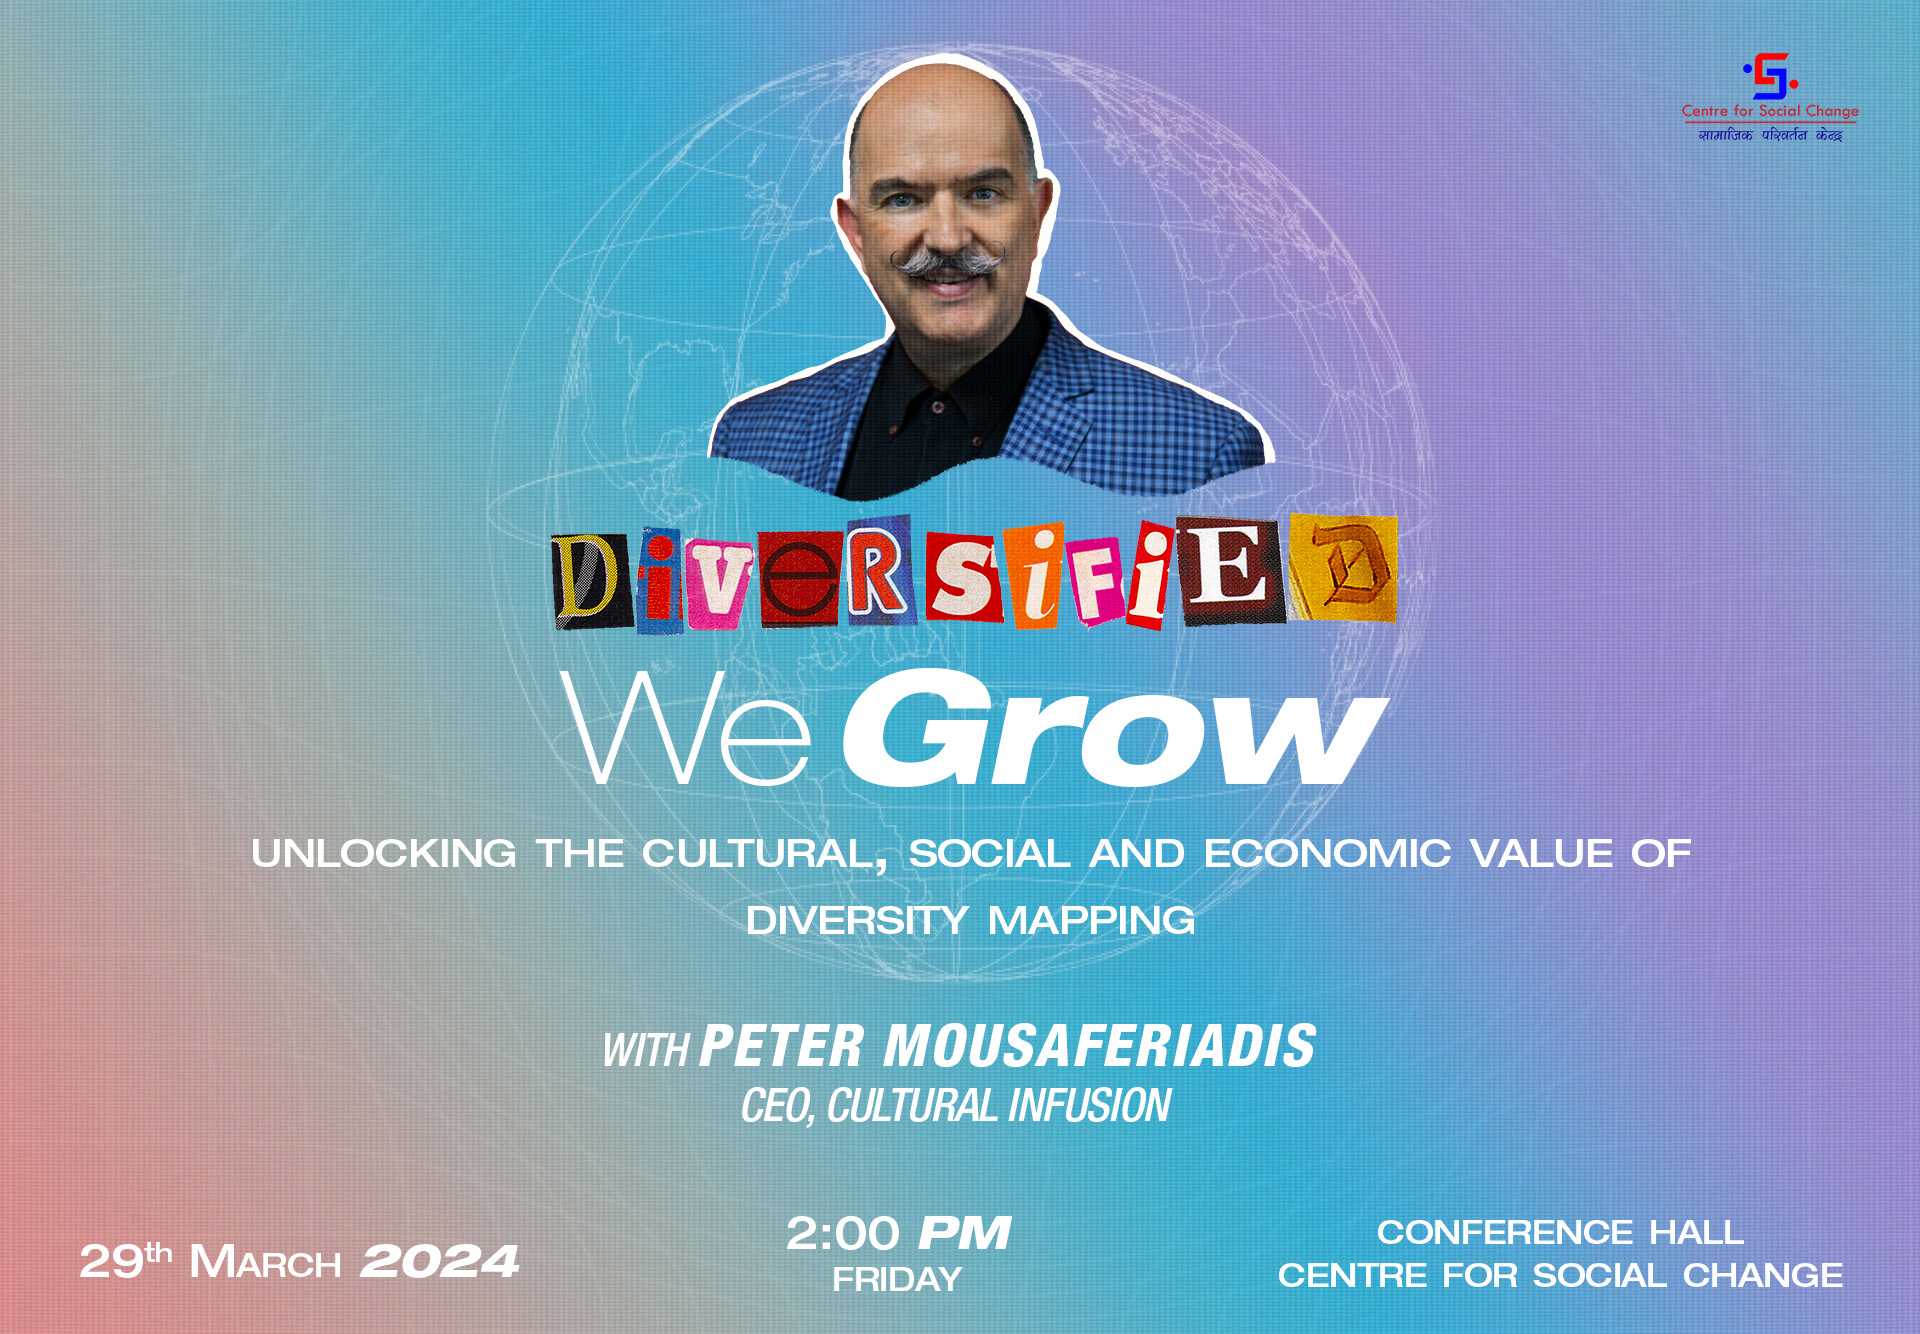 DIVERSIFIED WE GROW: Unlocking the cultural, social and economic value of diversity mapping